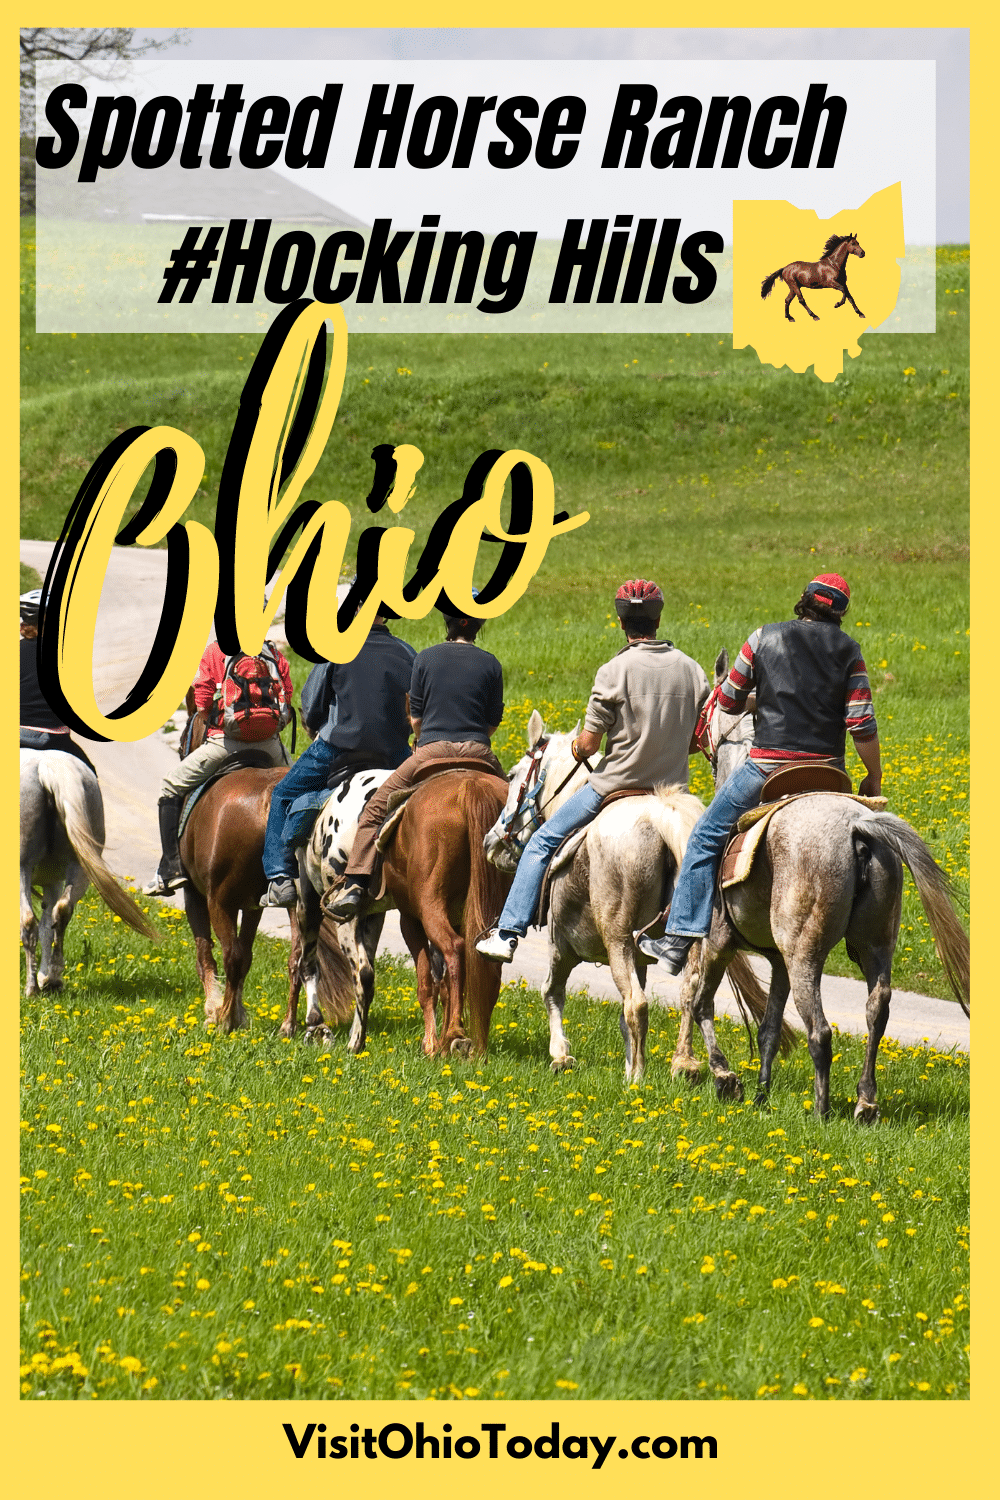 The Spotted Horse Ranch is located in the Hocking Hills region of Ohio! It offers guided horseback riding on over 30 miles of trails as well as camping with or without your own horses.  #hockinghills #ohio #horsebackriding